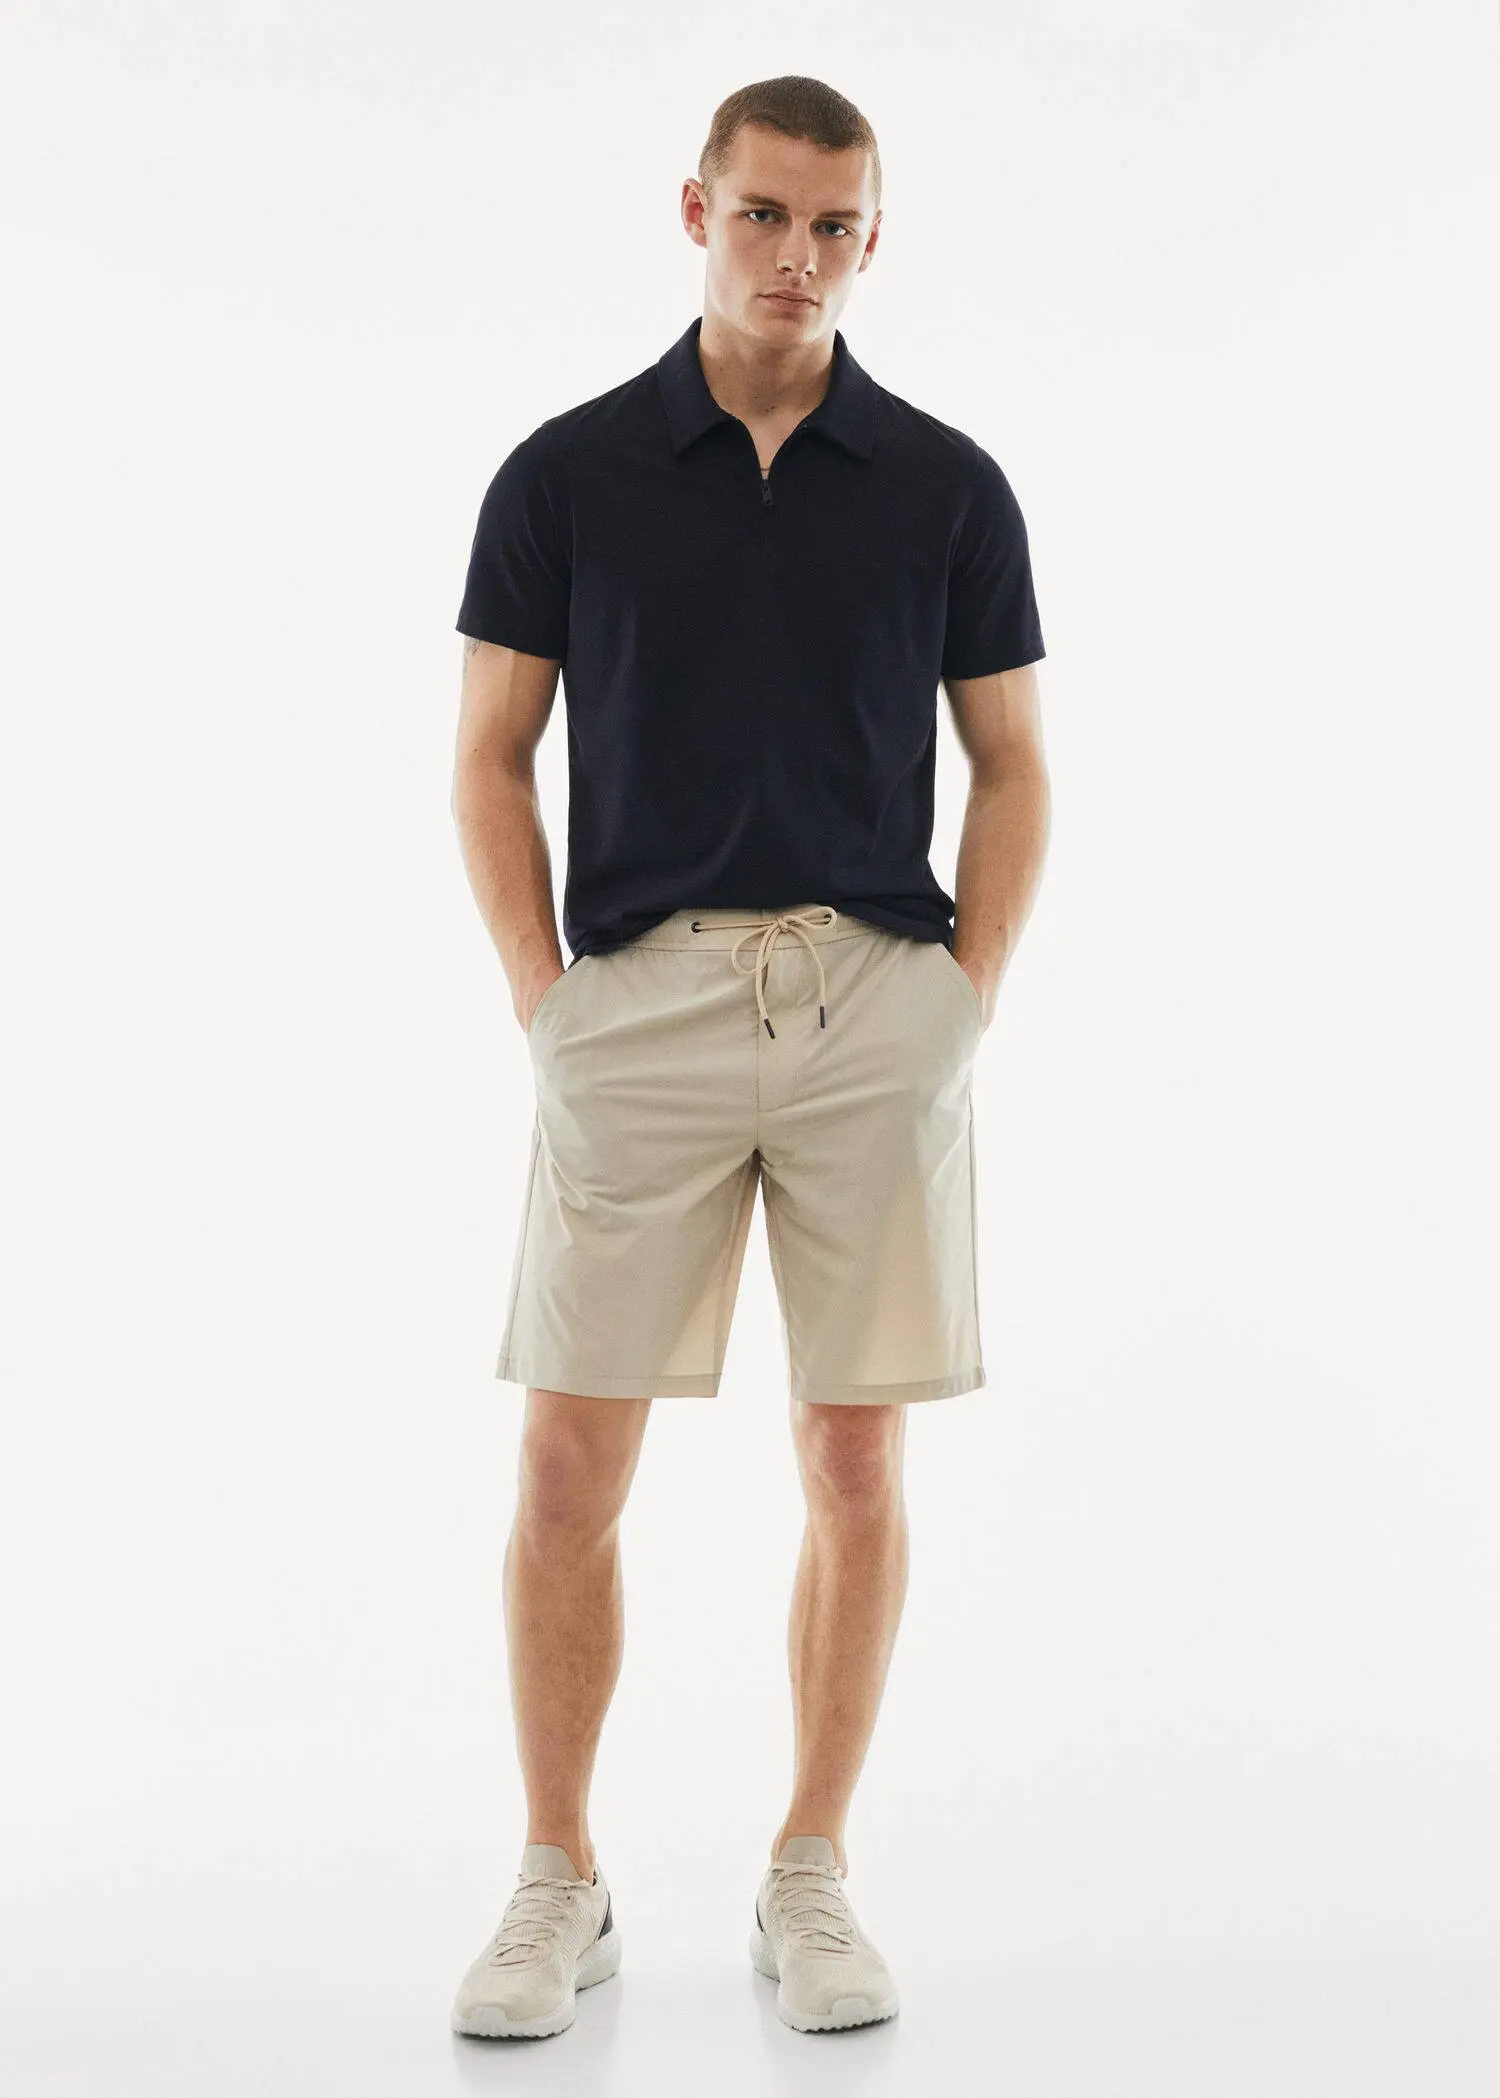 Mango Water-repellent technical bermuda shorts. a man in black shirt and beige shorts. 